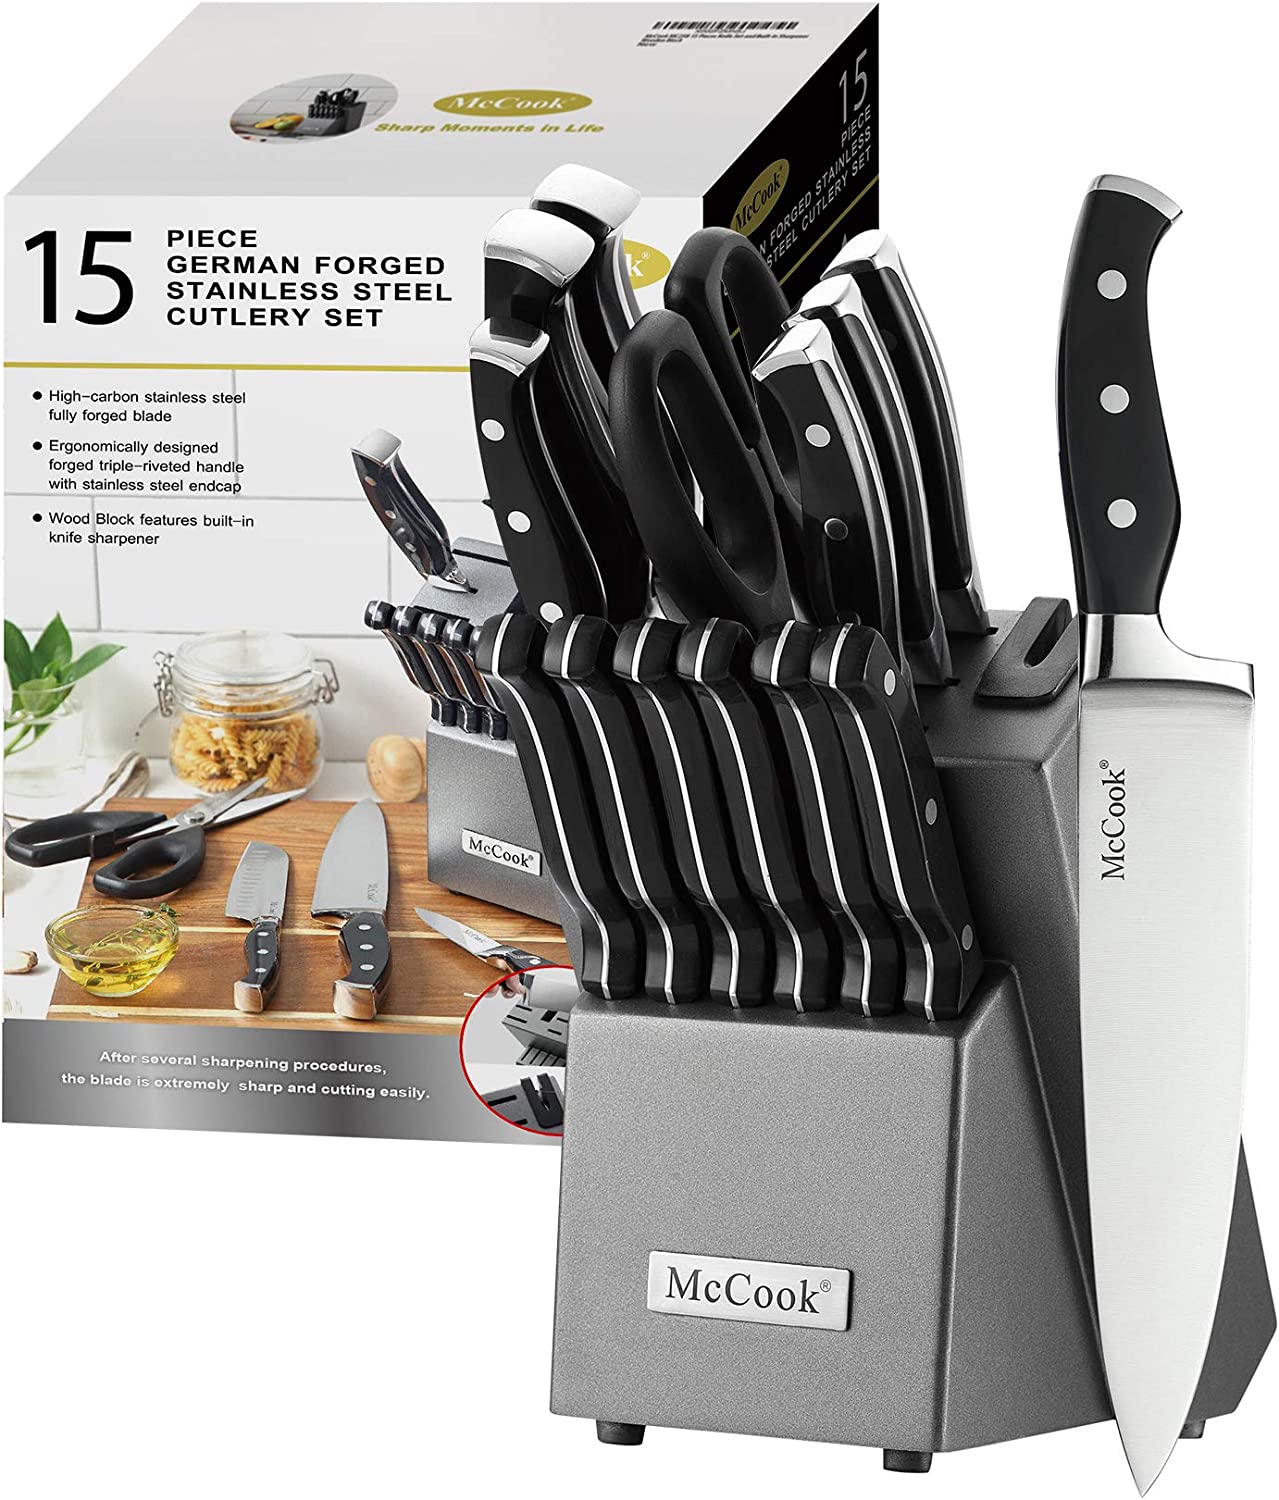 https://discounttoday.net/wp-content/uploads/2022/11/McCook%C2%AE-MC25A-Knife-Sets15-Pieces-German-Stainless-Steel-Kitchen-Knife-Block-Set-with-Built-in-Sharpener.jpg